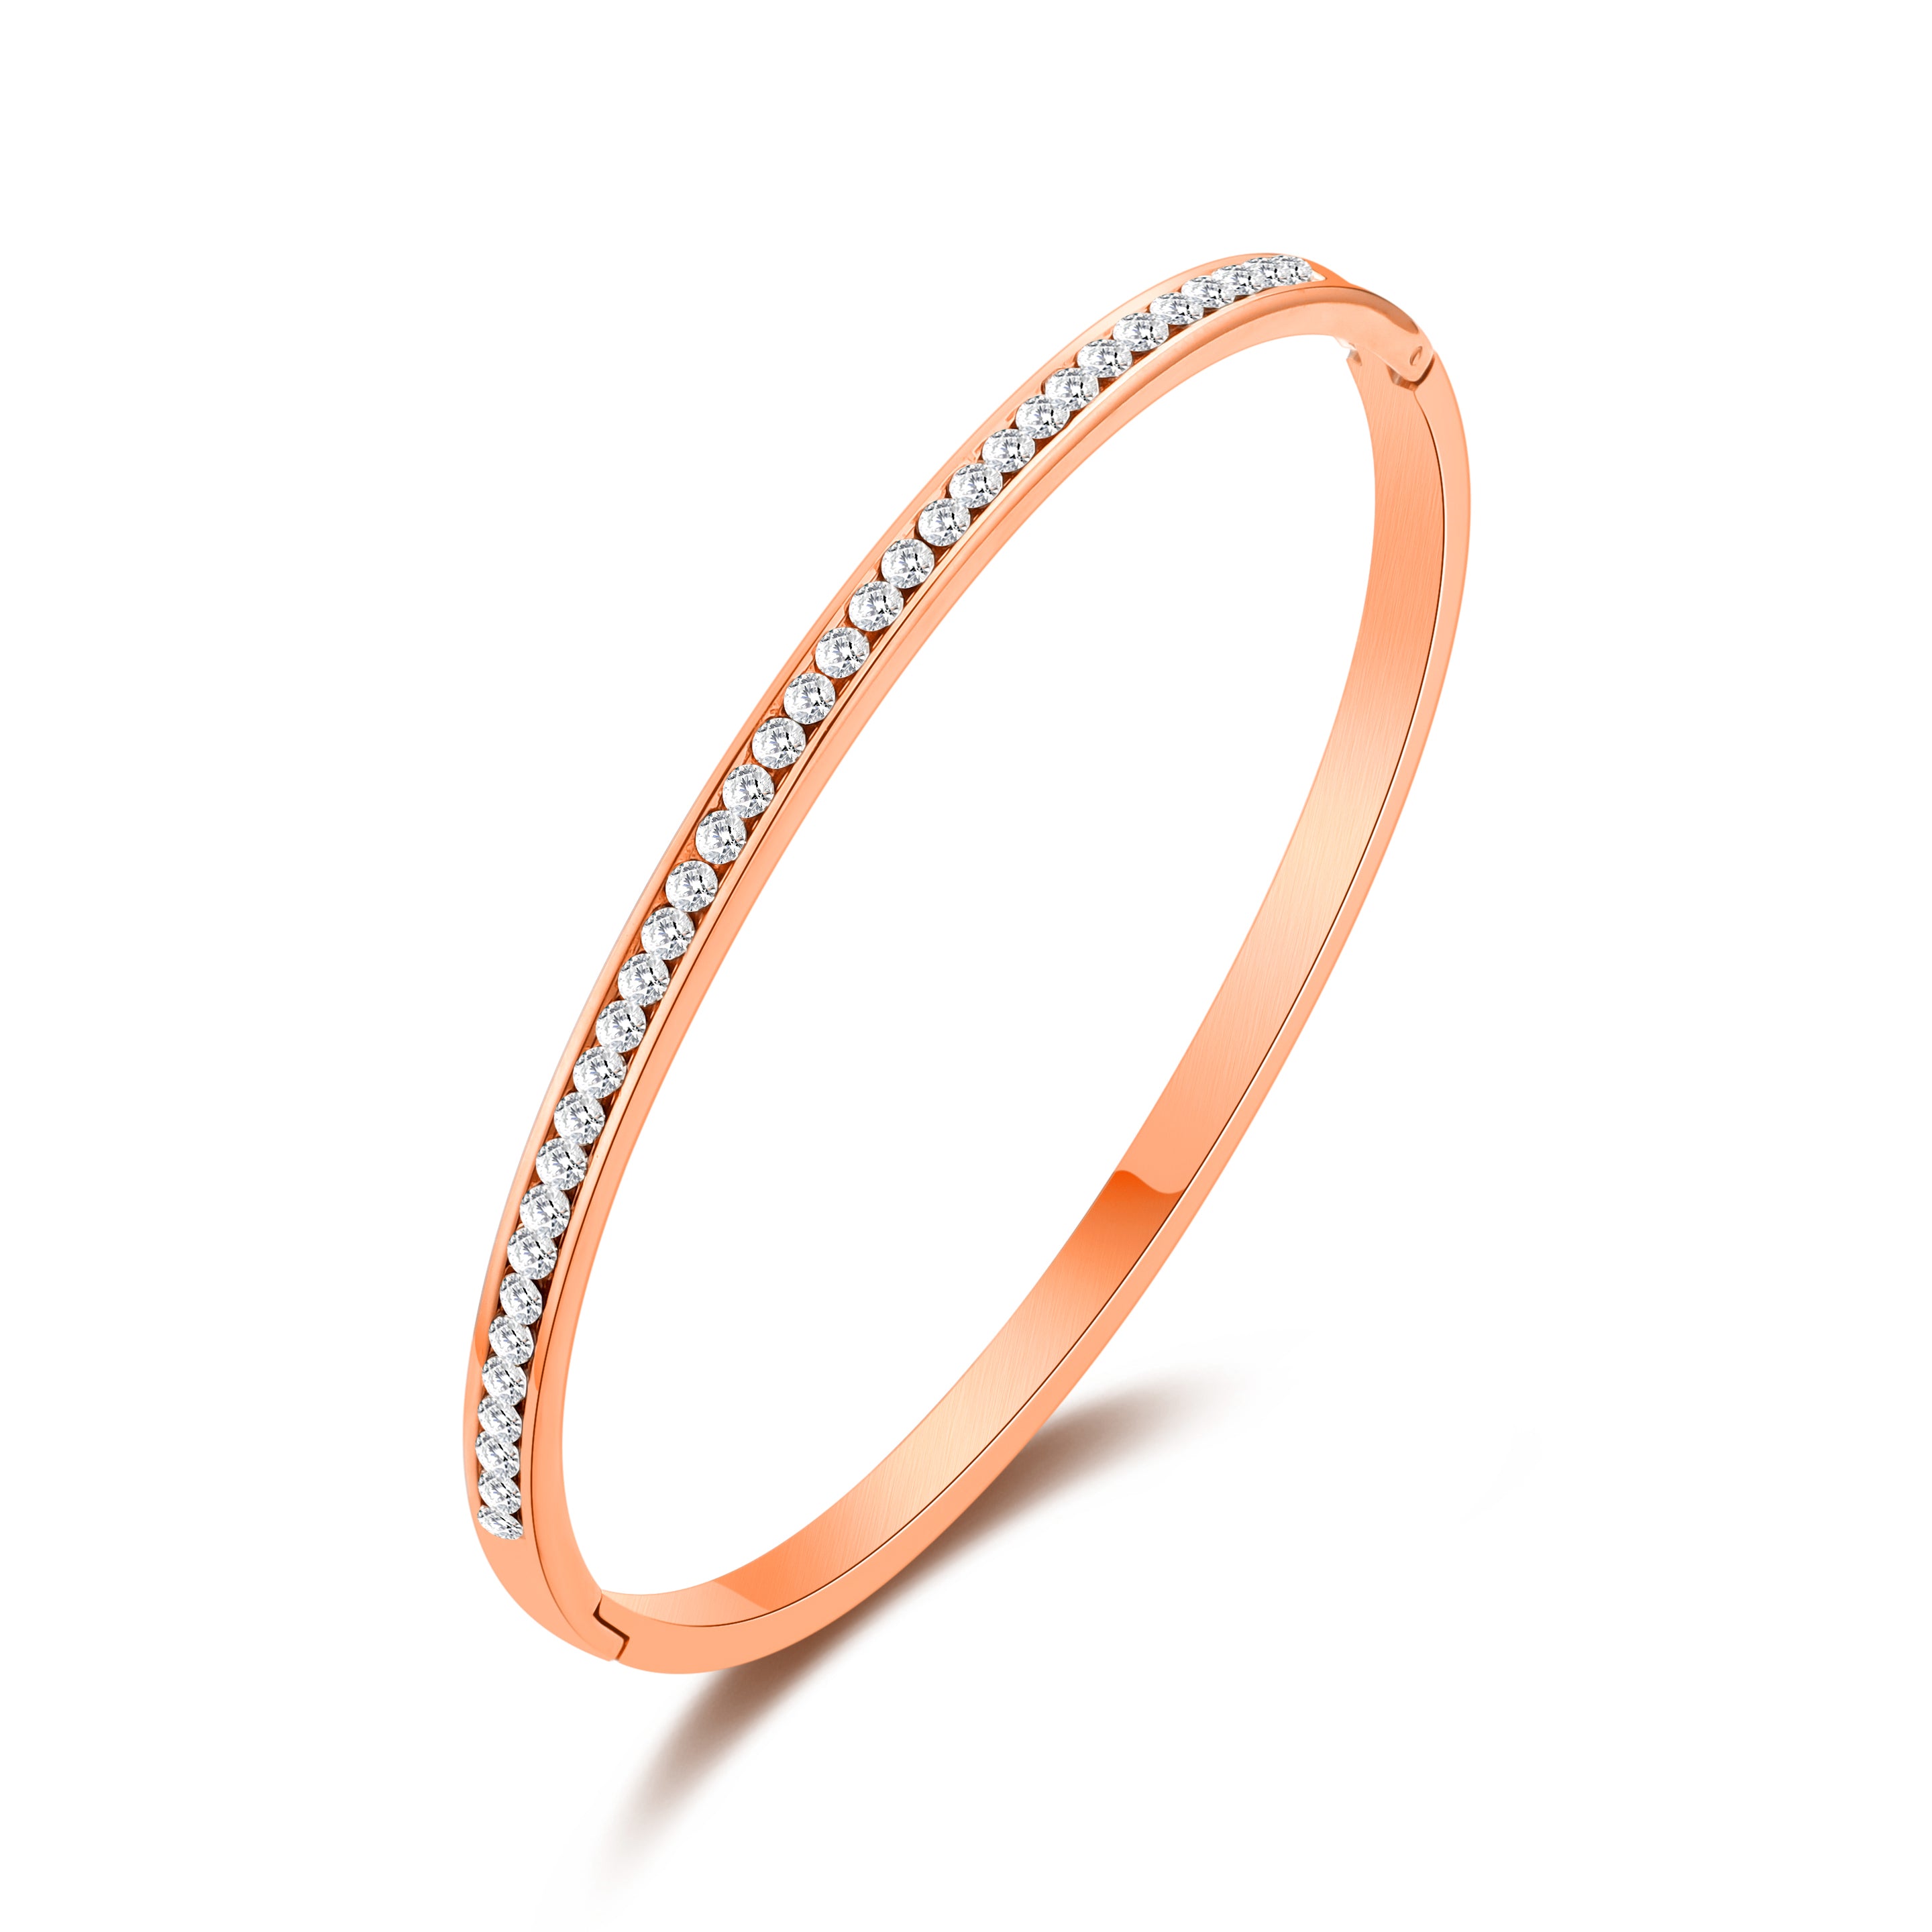 Rose Gold Plated Channel Set Bangle Created with Zircondia® Crystals by Philip Jones Jewellery